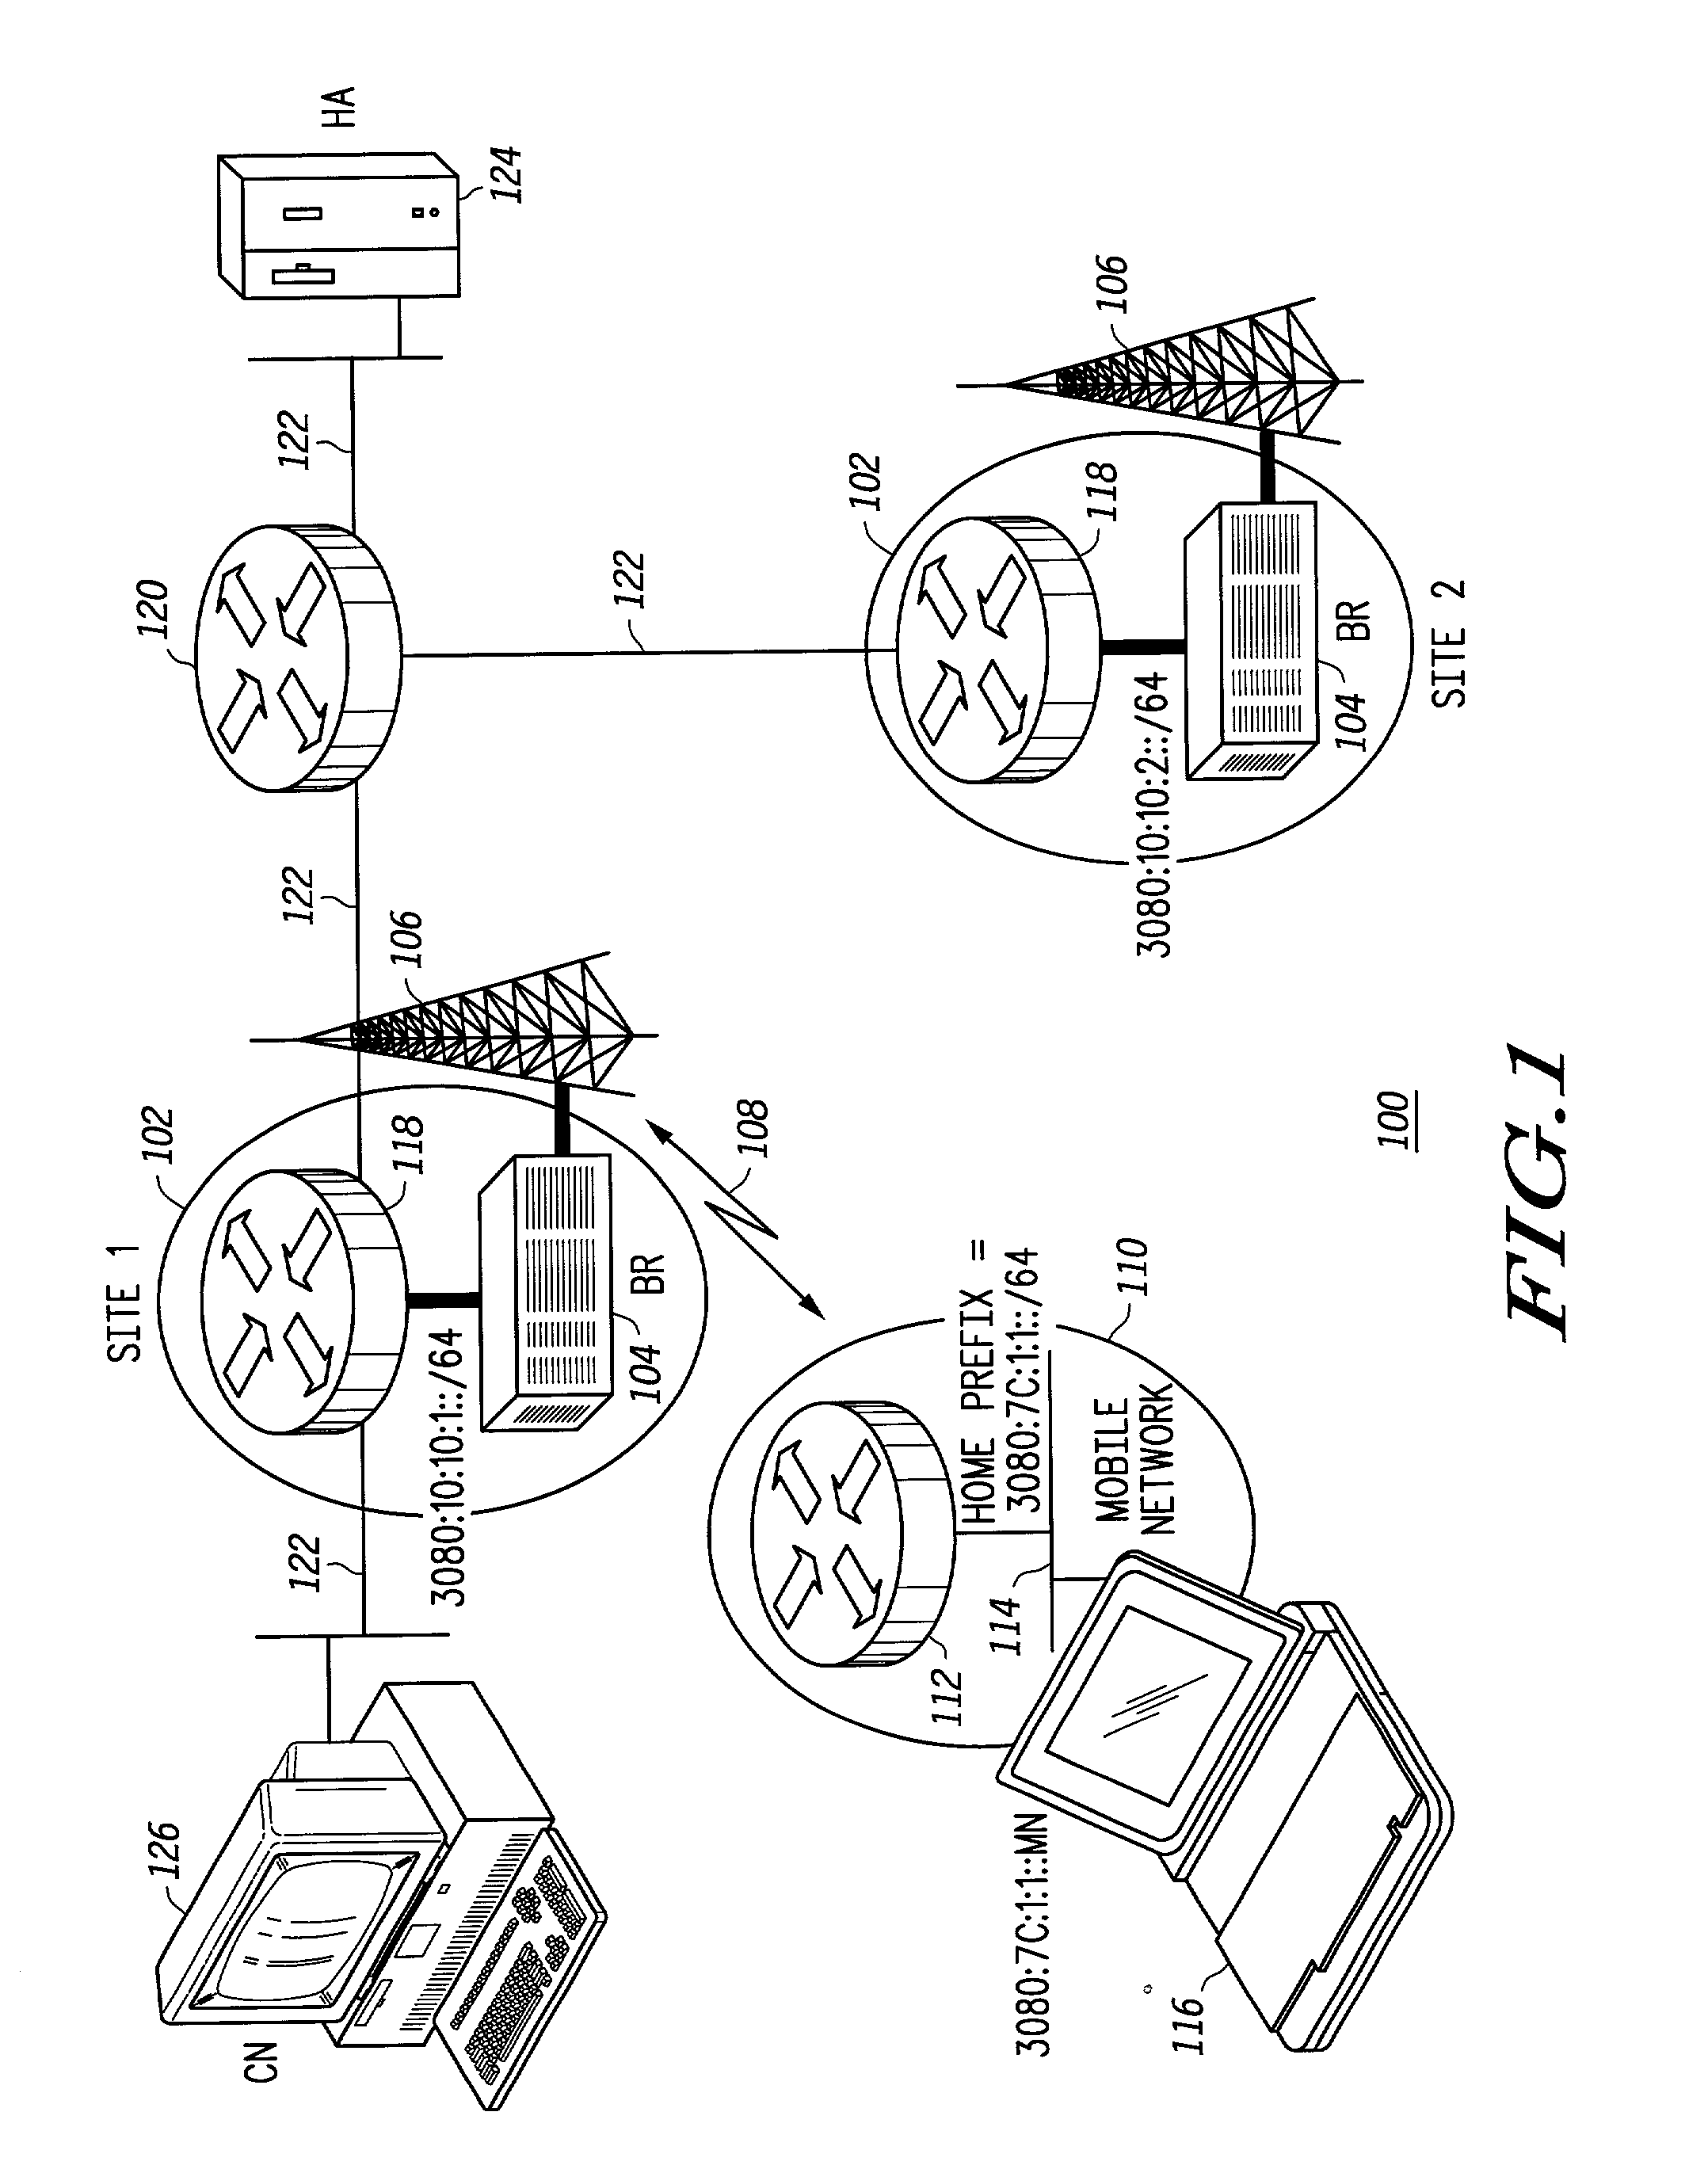 Method and apparatus for providing IP mobility for mobile networks and detachable mobile network nodes